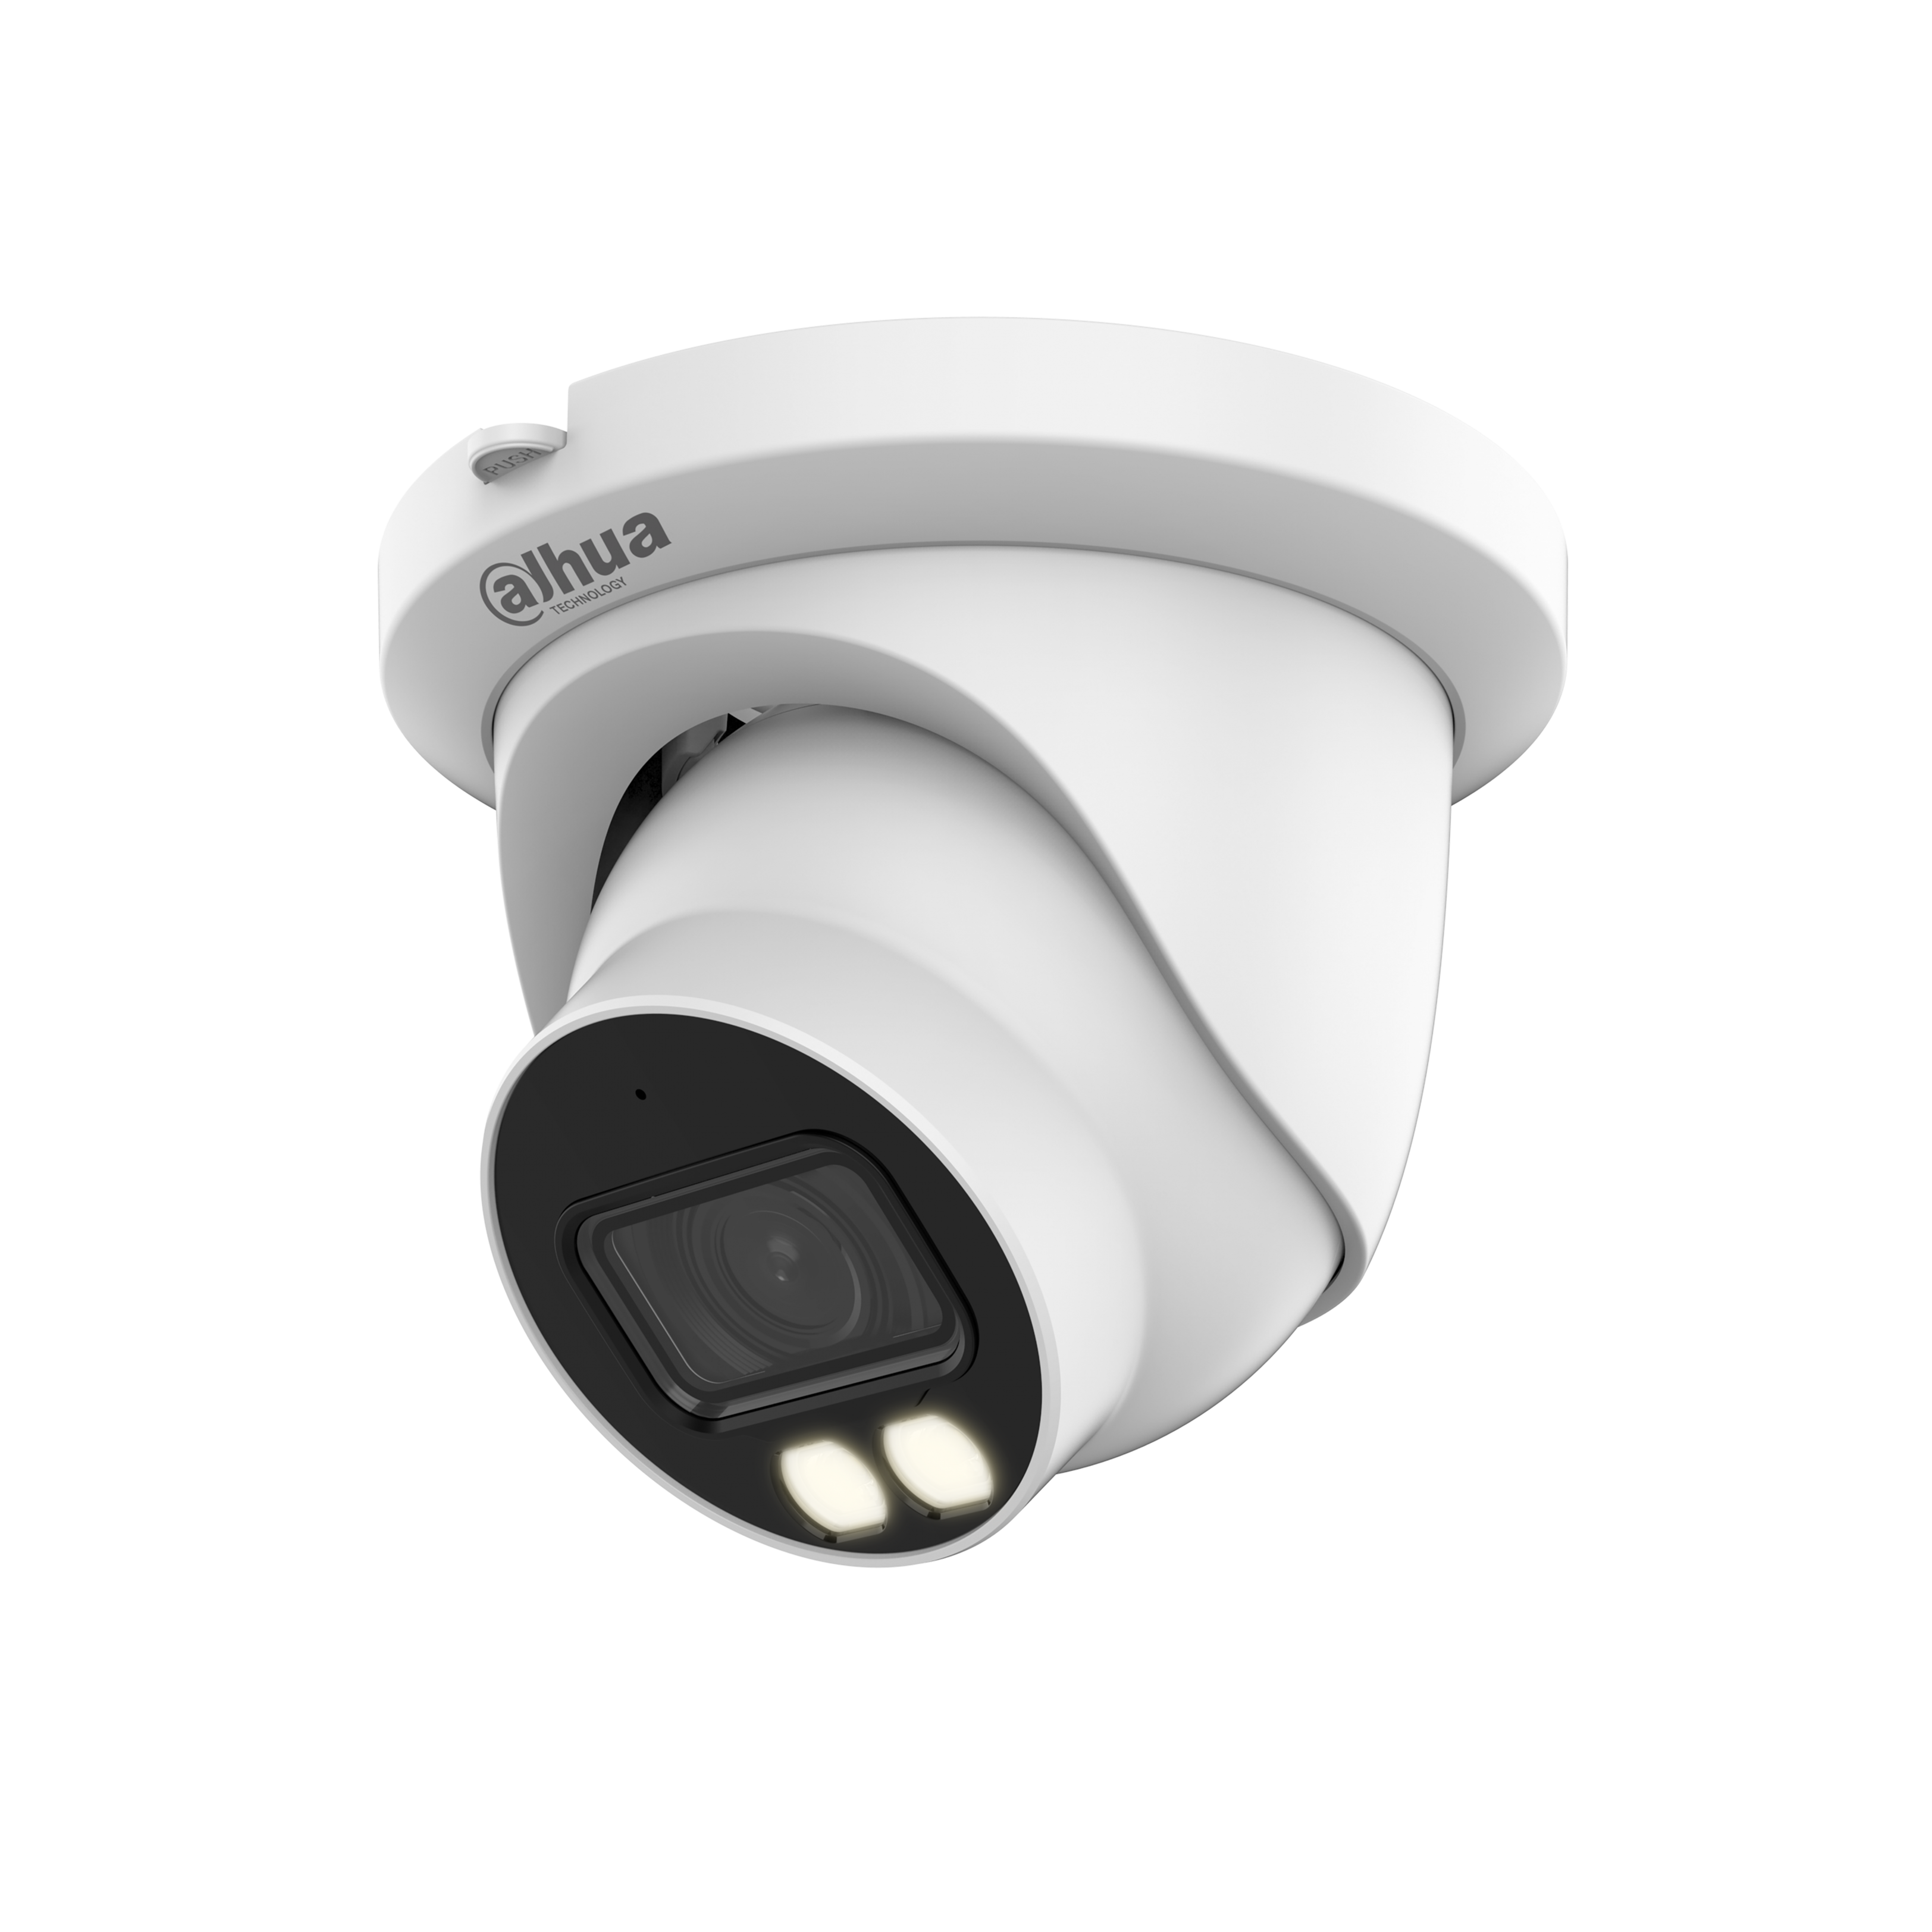 WIZMIND SERIES IP CAMERA WHITE AI PEOPLE COUNT 4MP H.264/4+/5/5+ TURRET 140 TRUE WDR METAL 2.8MM FIXED LENS FULL COLOUR WARM LED 30M EPOE IP67 BUILT IN MIC SUPPORT UP TO 256GB SD 12VDC